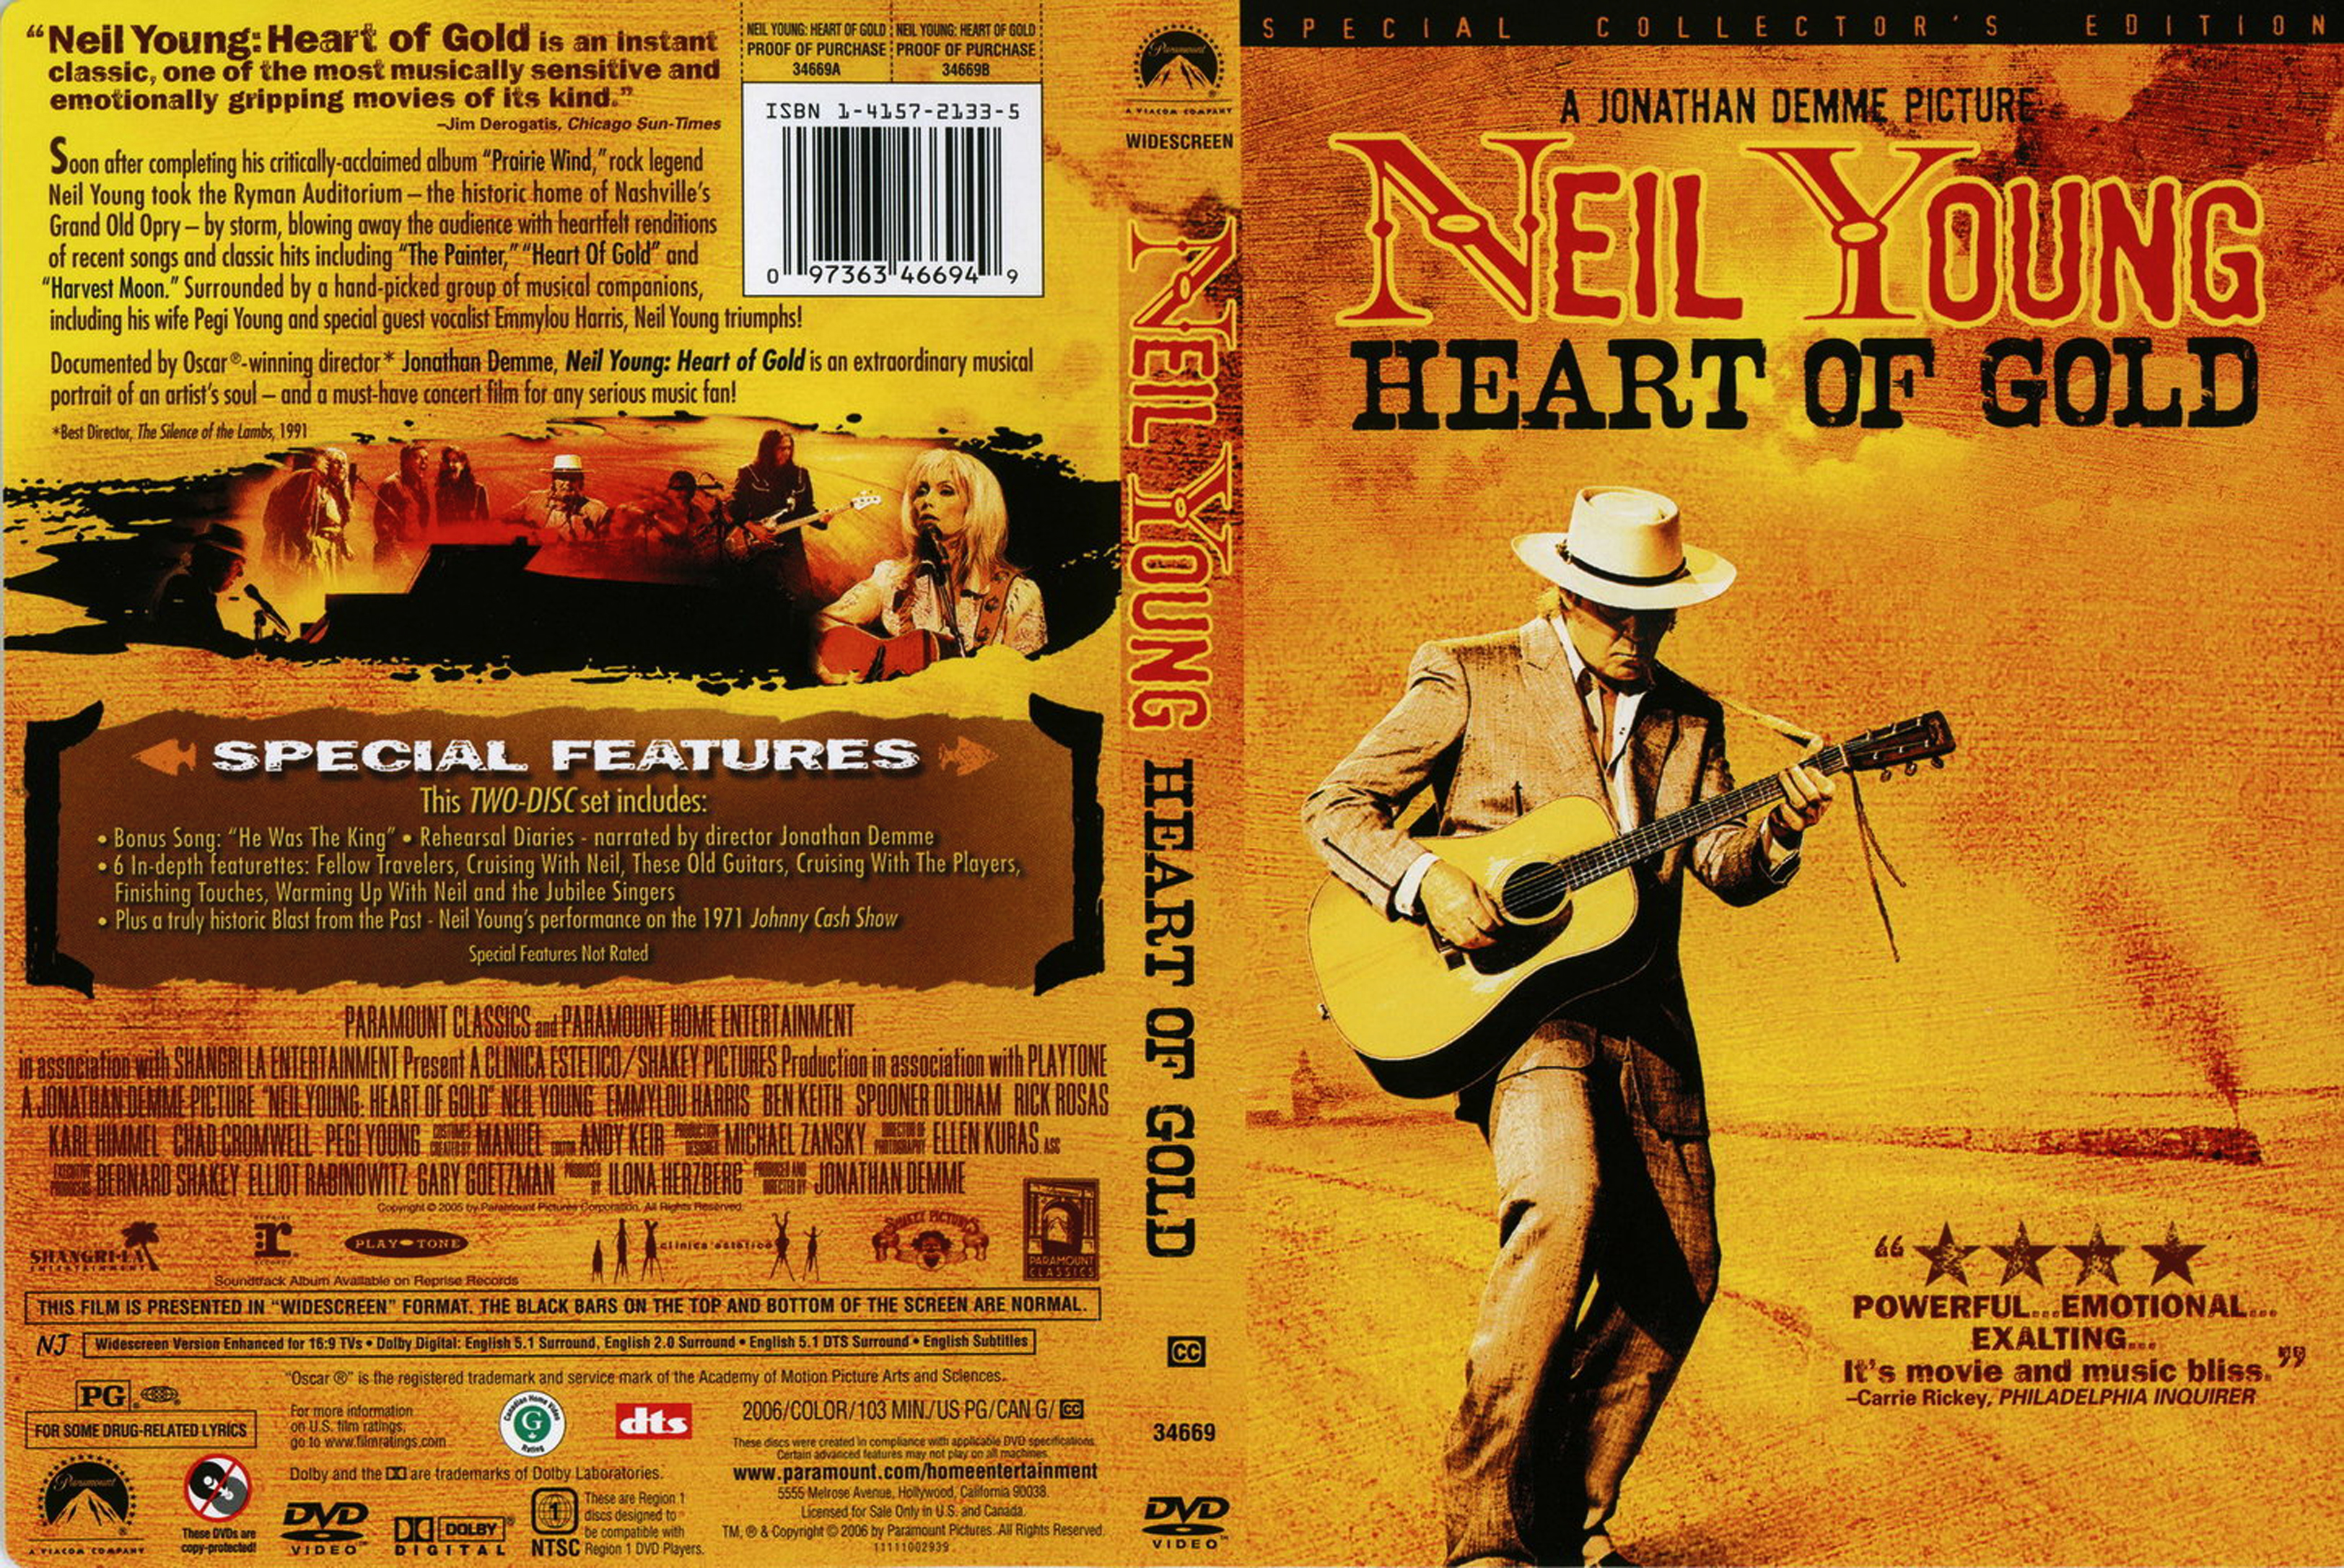 Jaquette DVD Neil Young Heart Of Gold